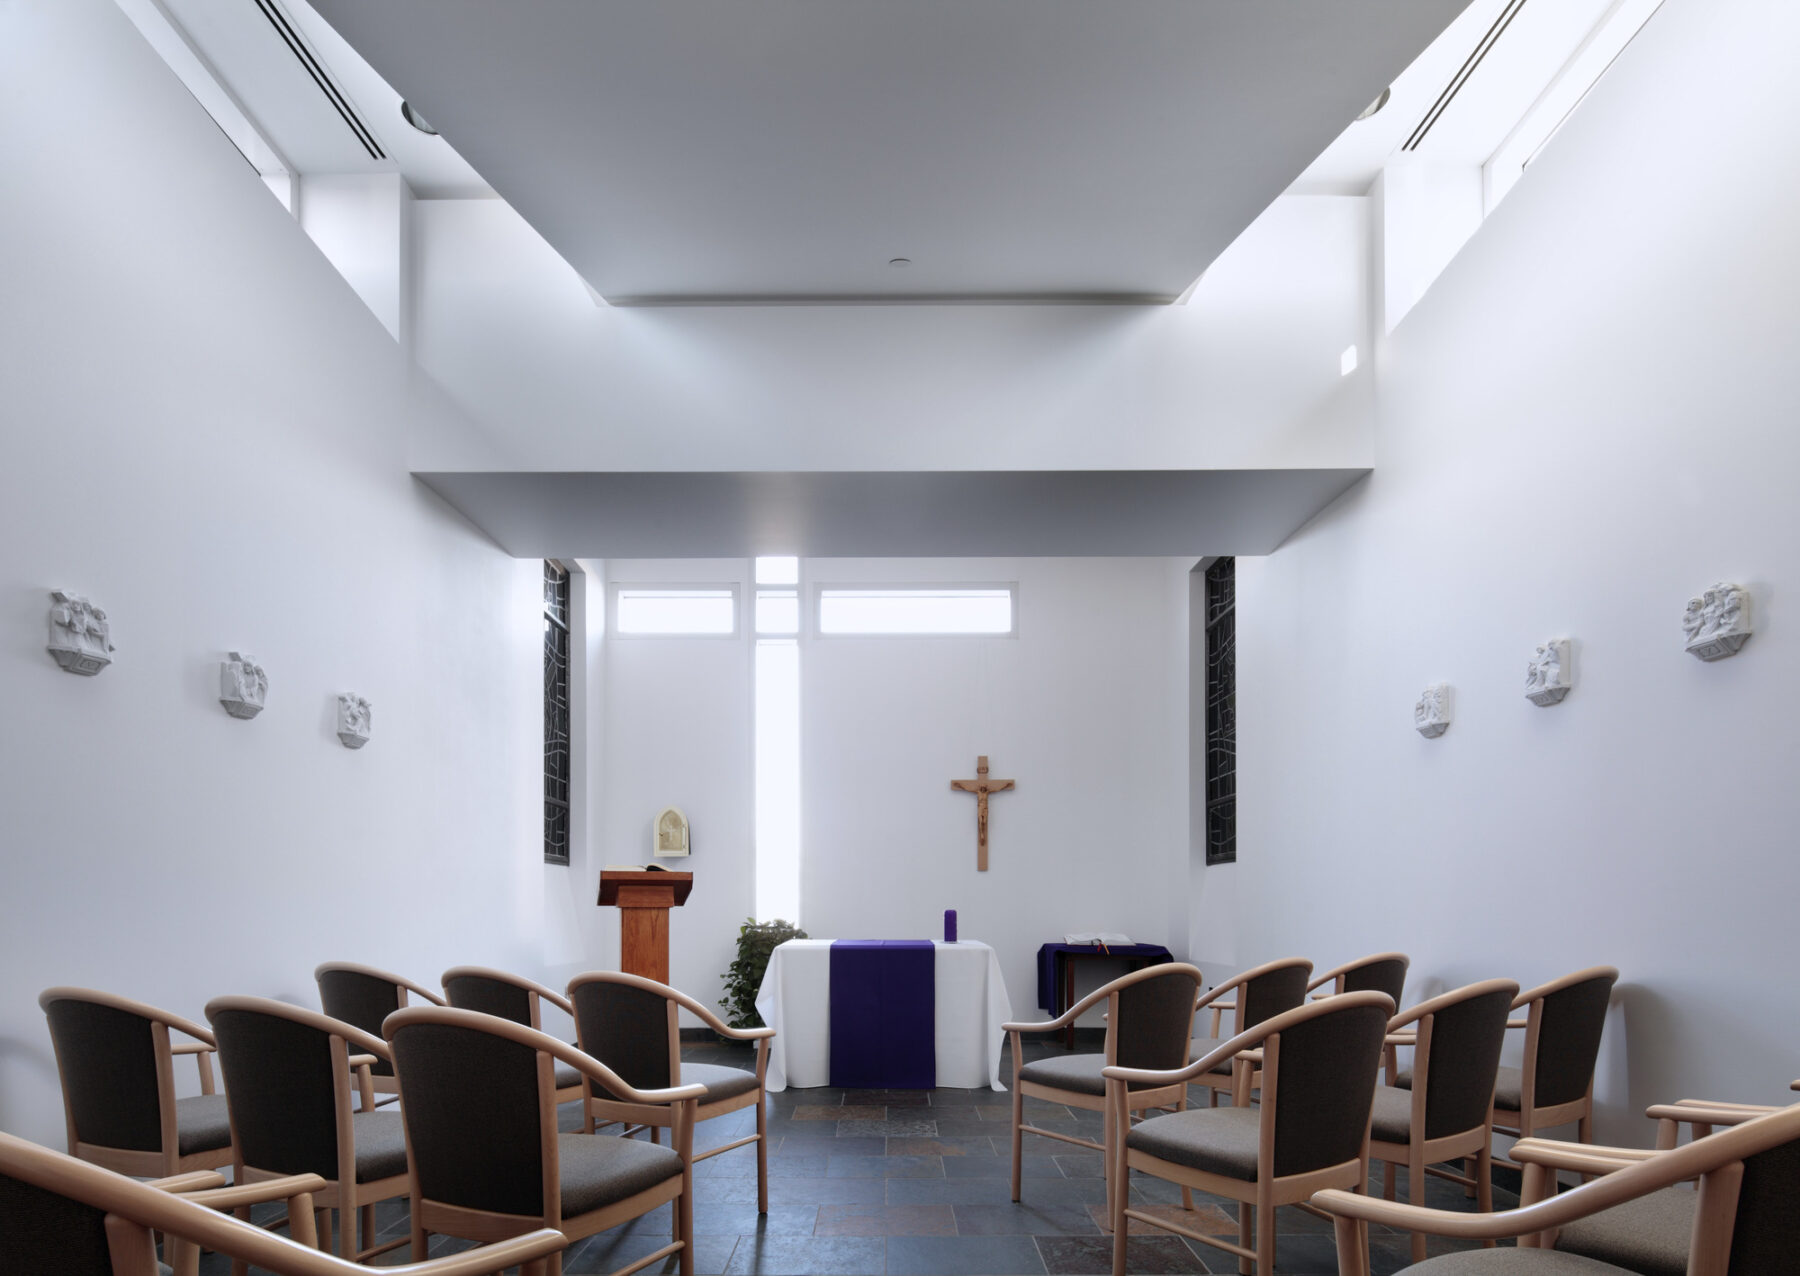 color photo of a small white chapel, lit by clerestory windows